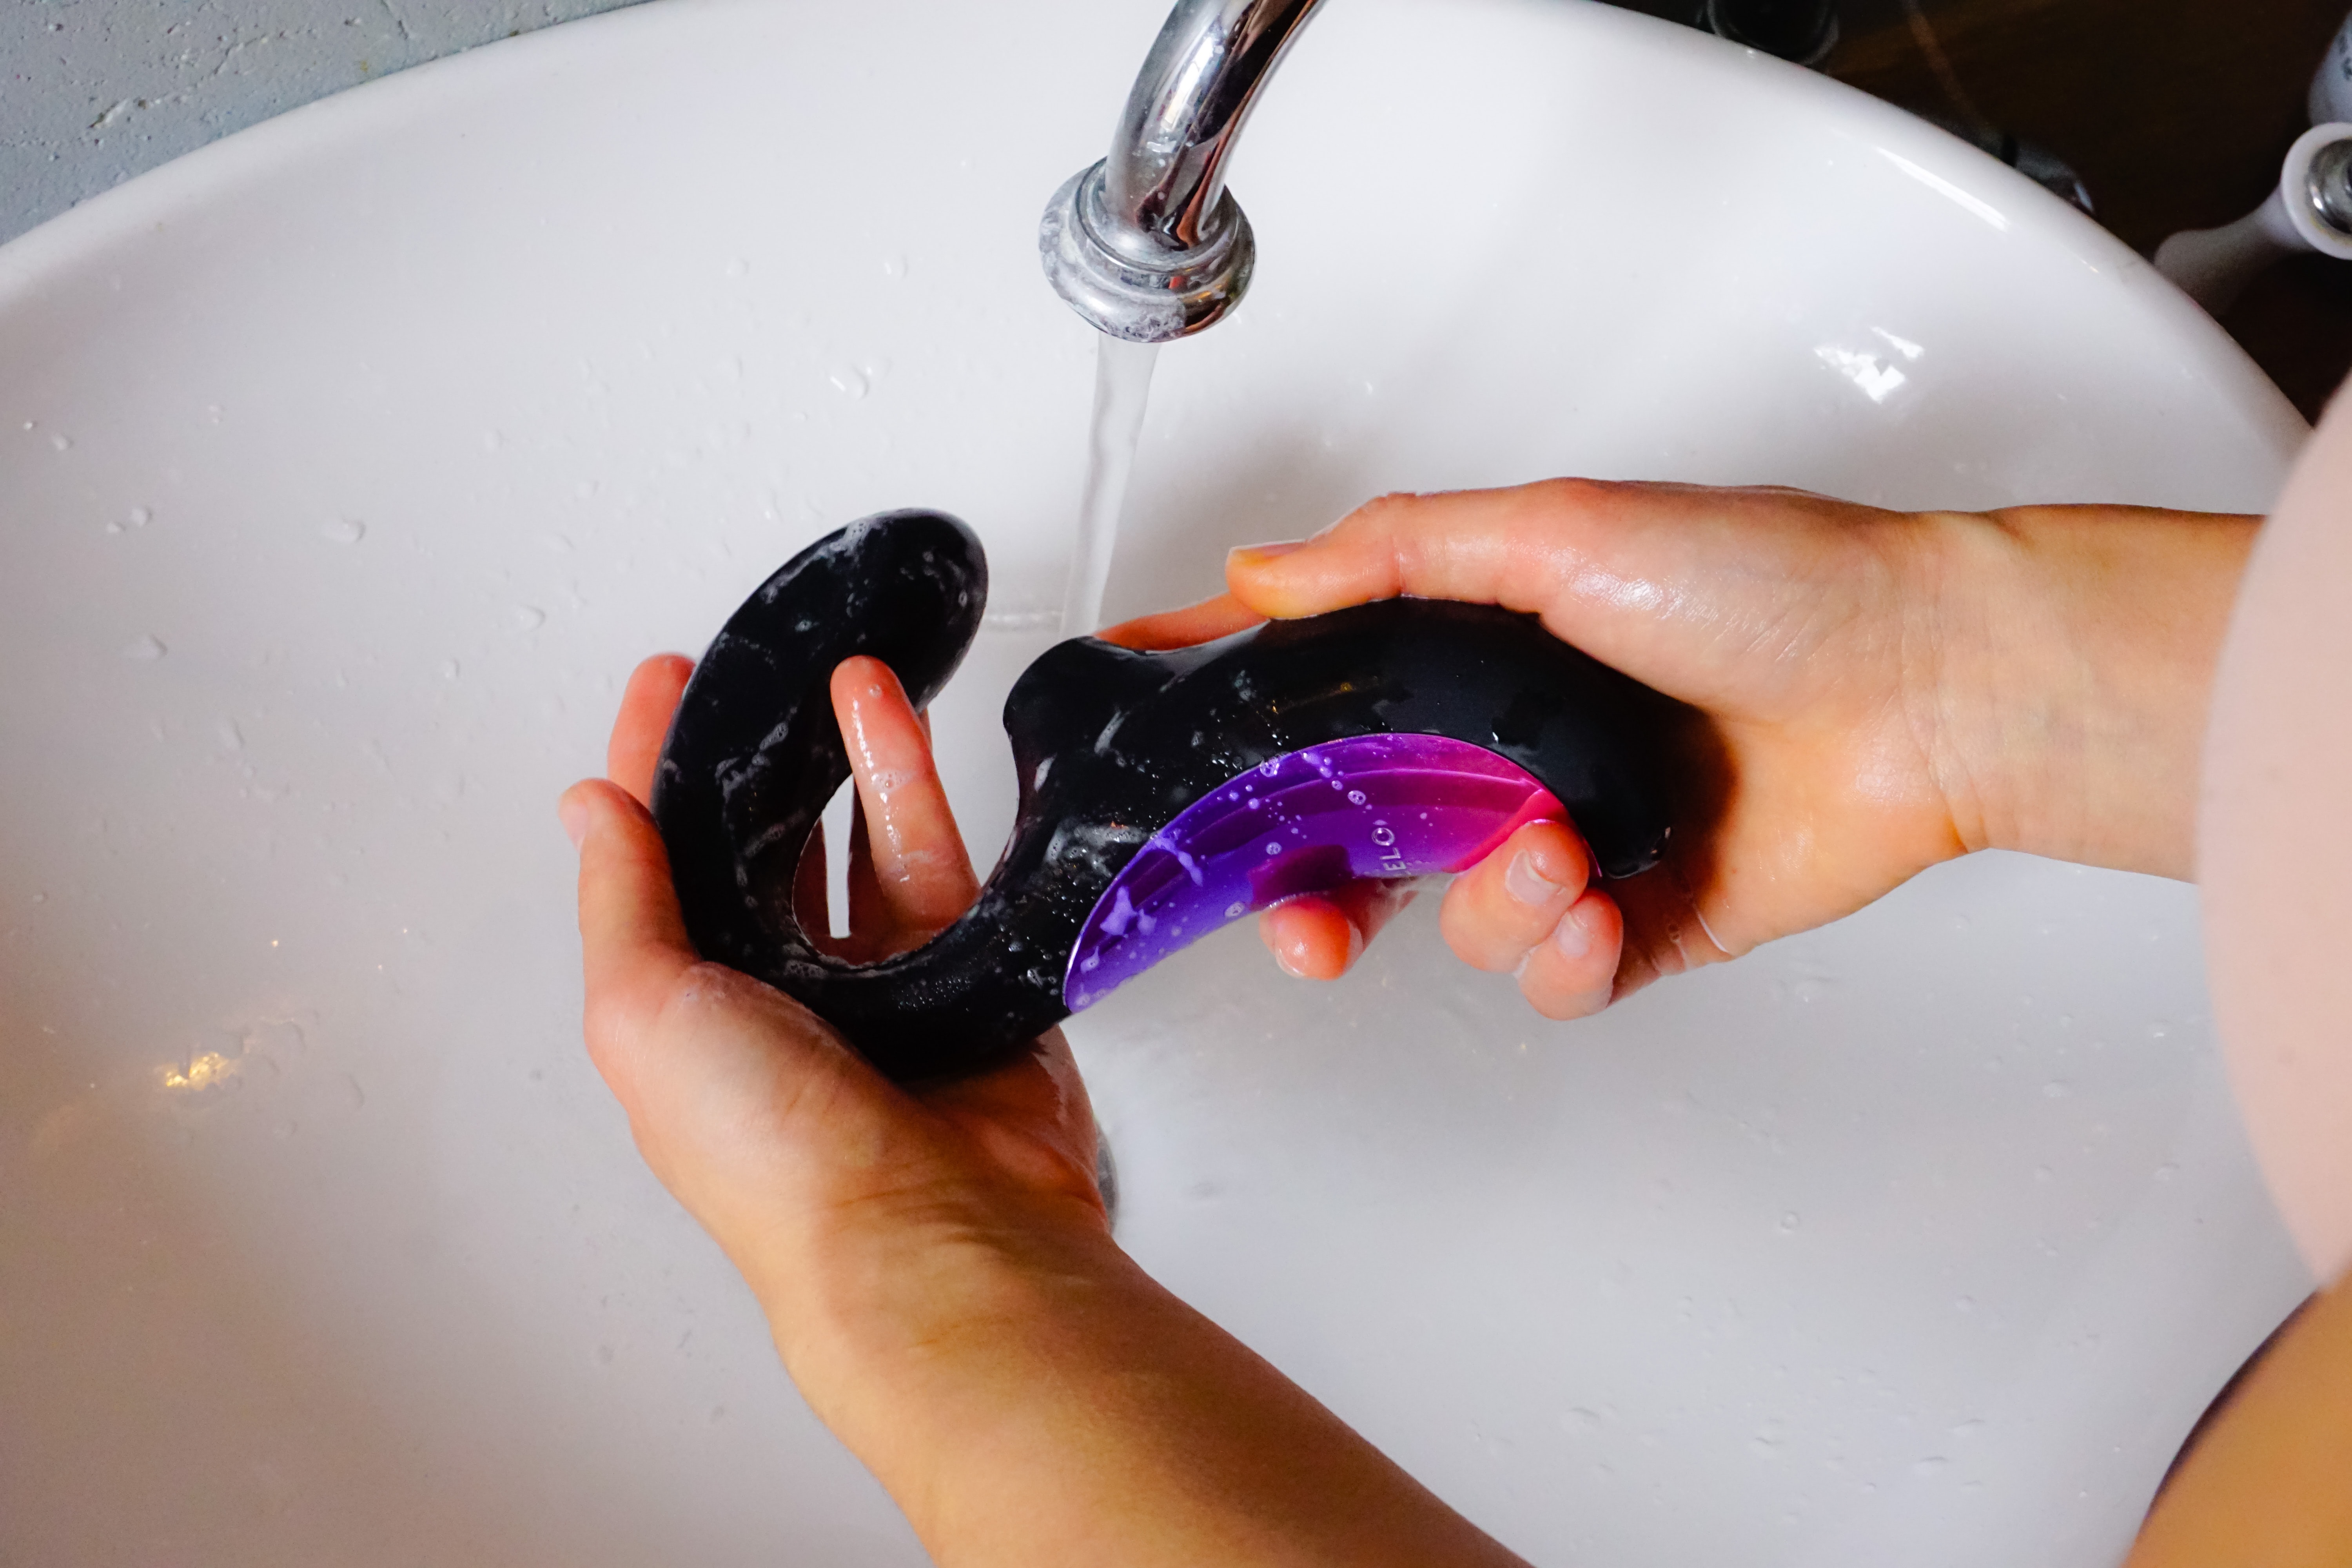 How to clean sex toys based on material type